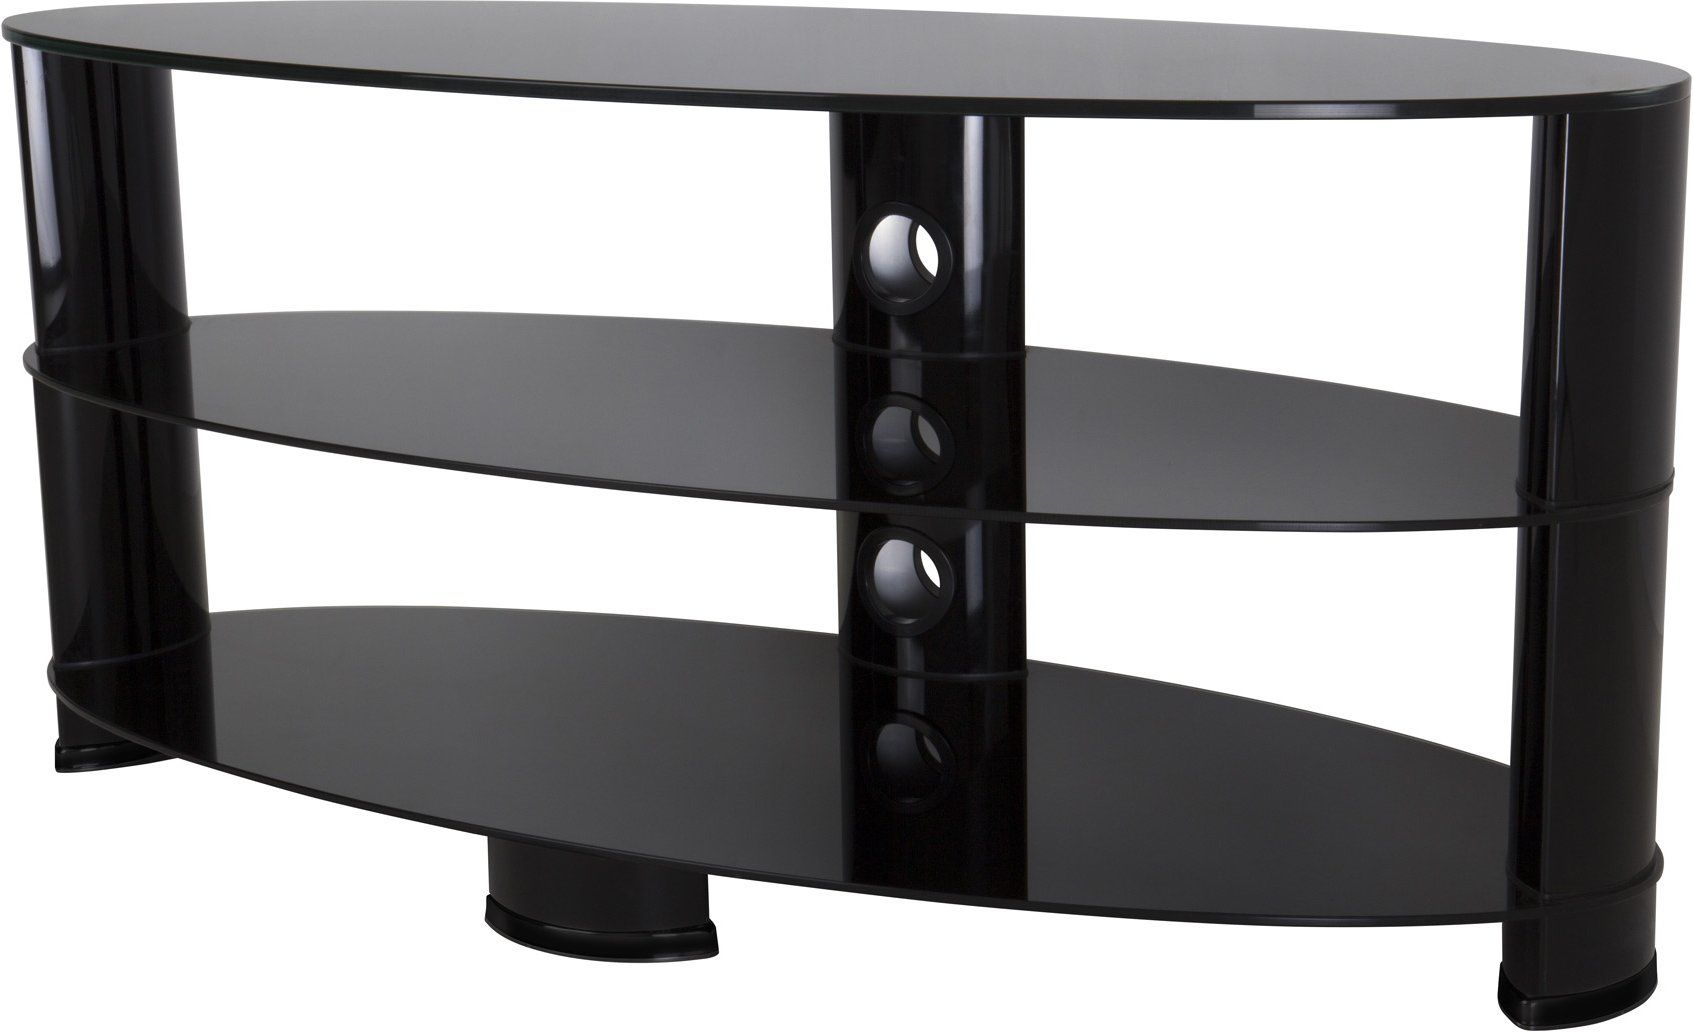 Avf Ovl1200bb Oval Glass Tv Stand For Tvs Up To 55 Inch Within Glass Shelves Tv Stands For Tvs Up To 50" (View 6 of 15)